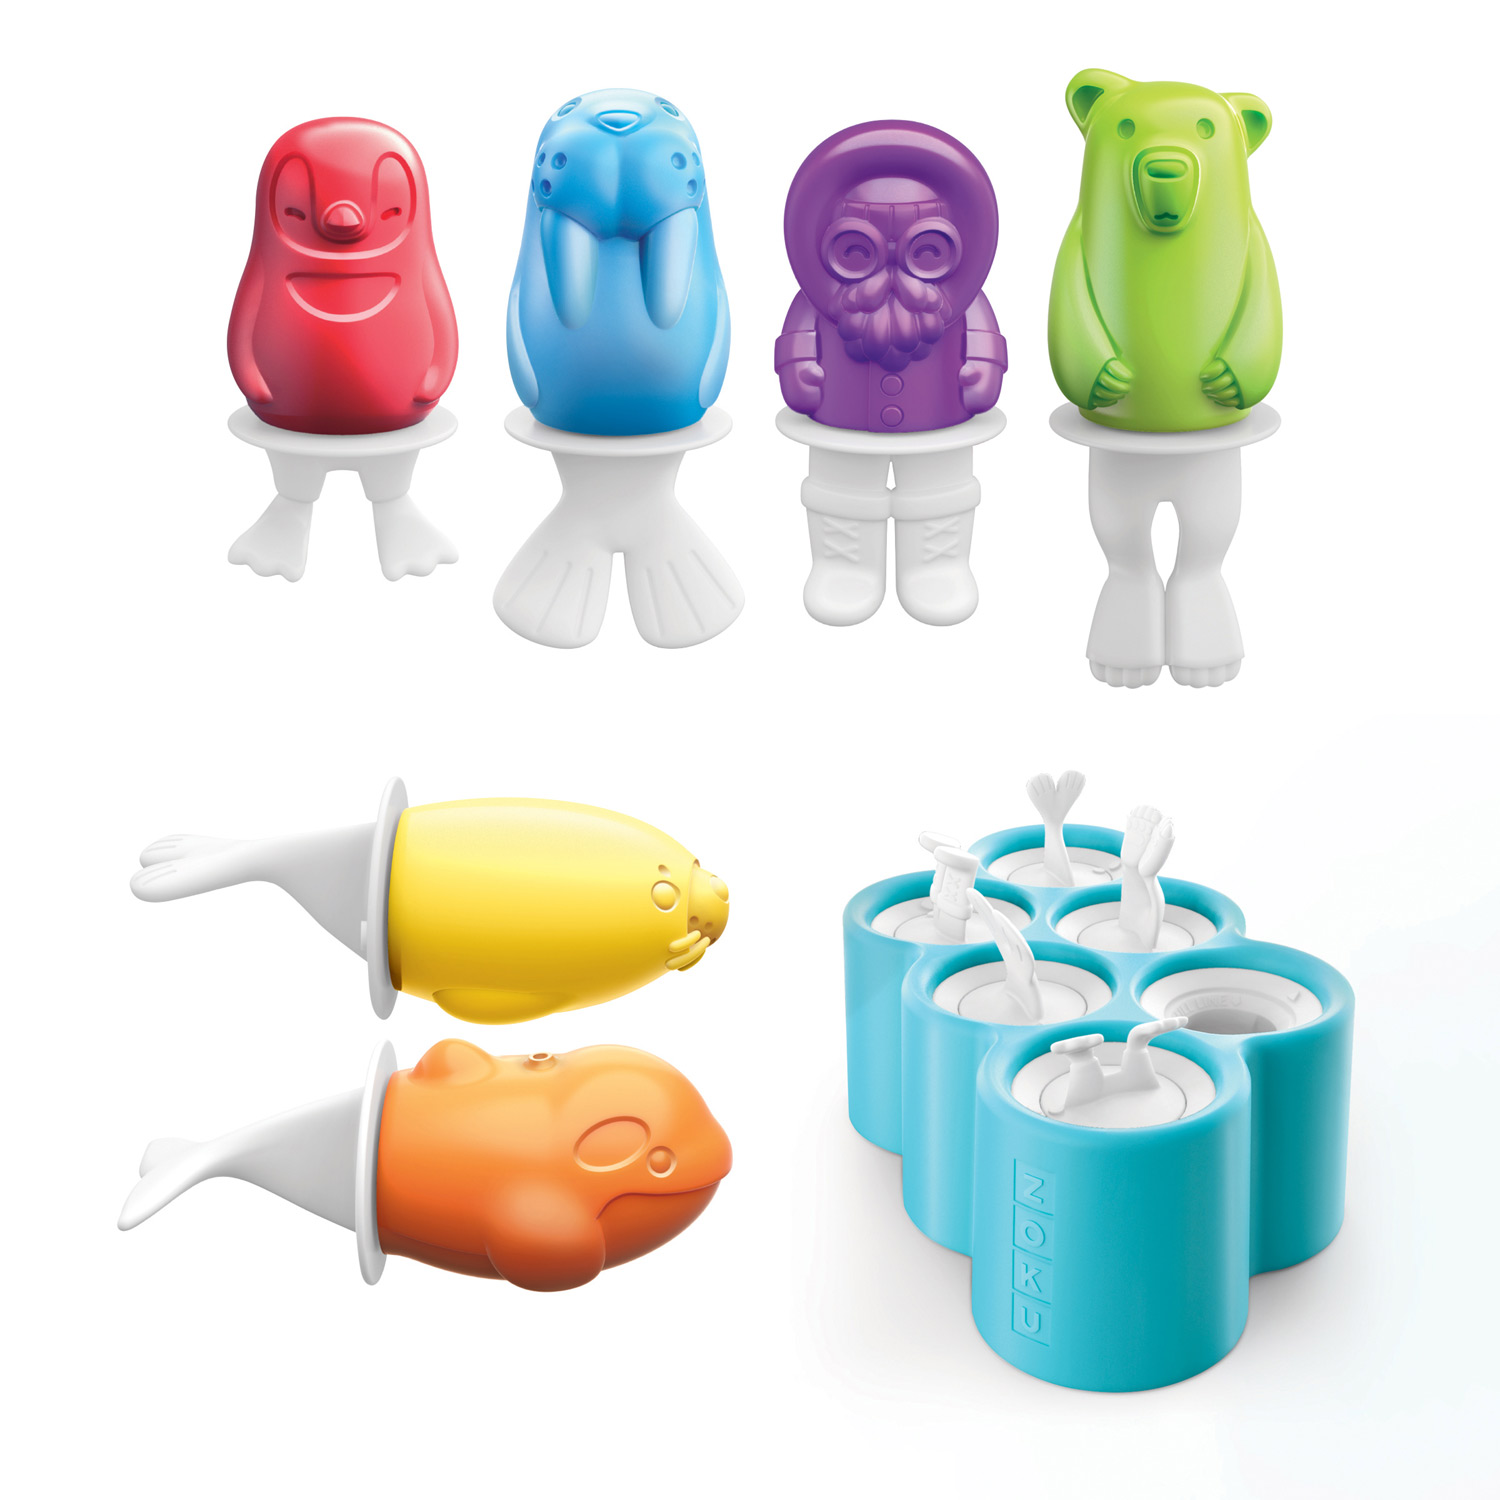 GENUINE Zoku Polar Pops - Set of 6 Slow Pop Ice Lolly moulds with drip guards - official Zoku stockist